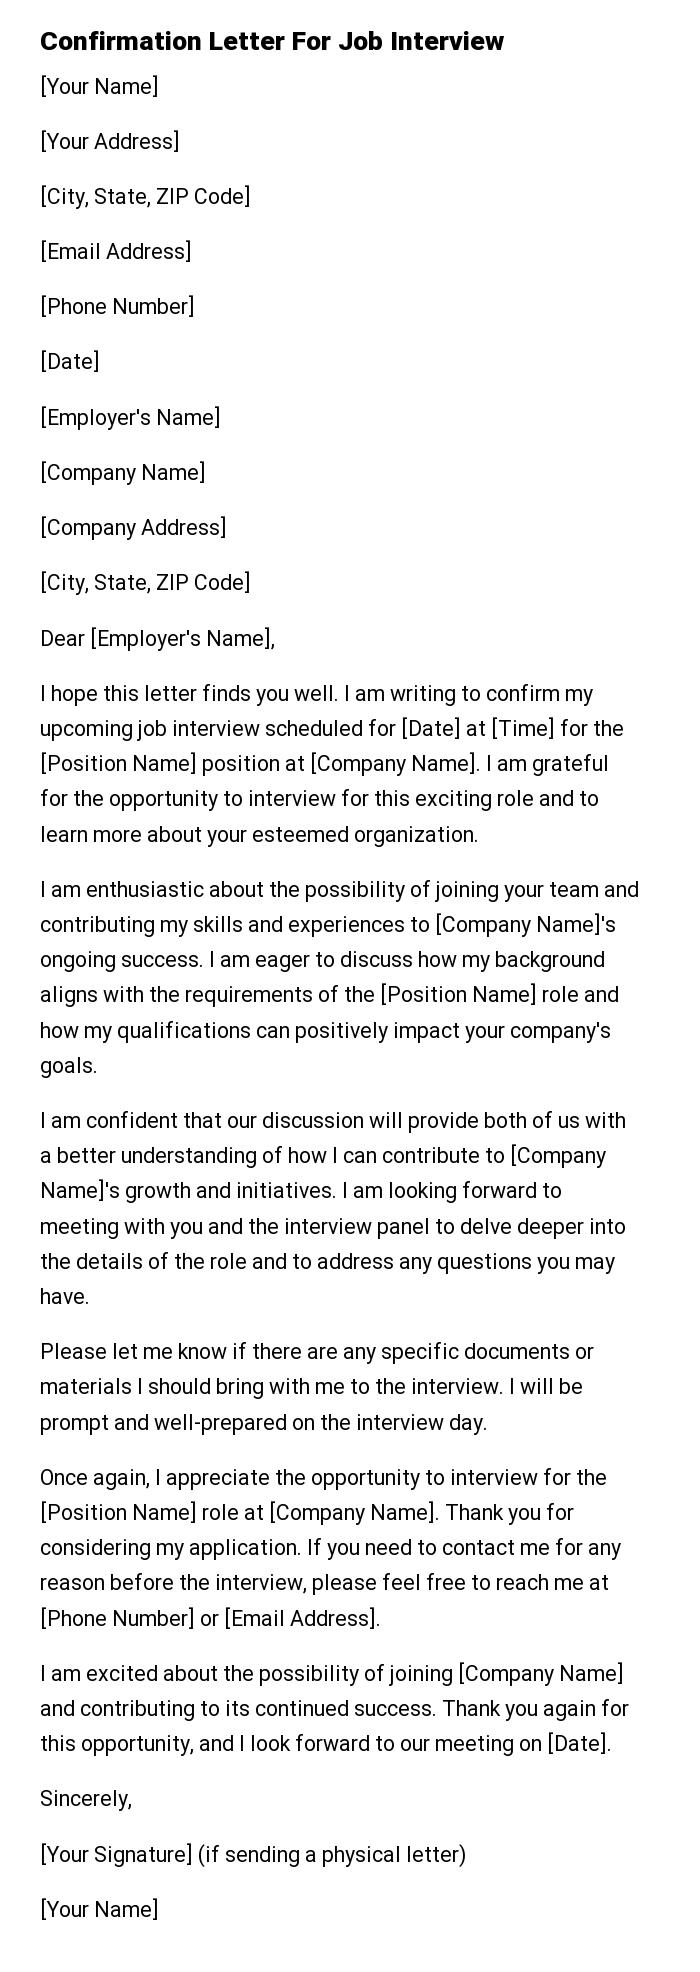 Confirmation Letter For Job Interview